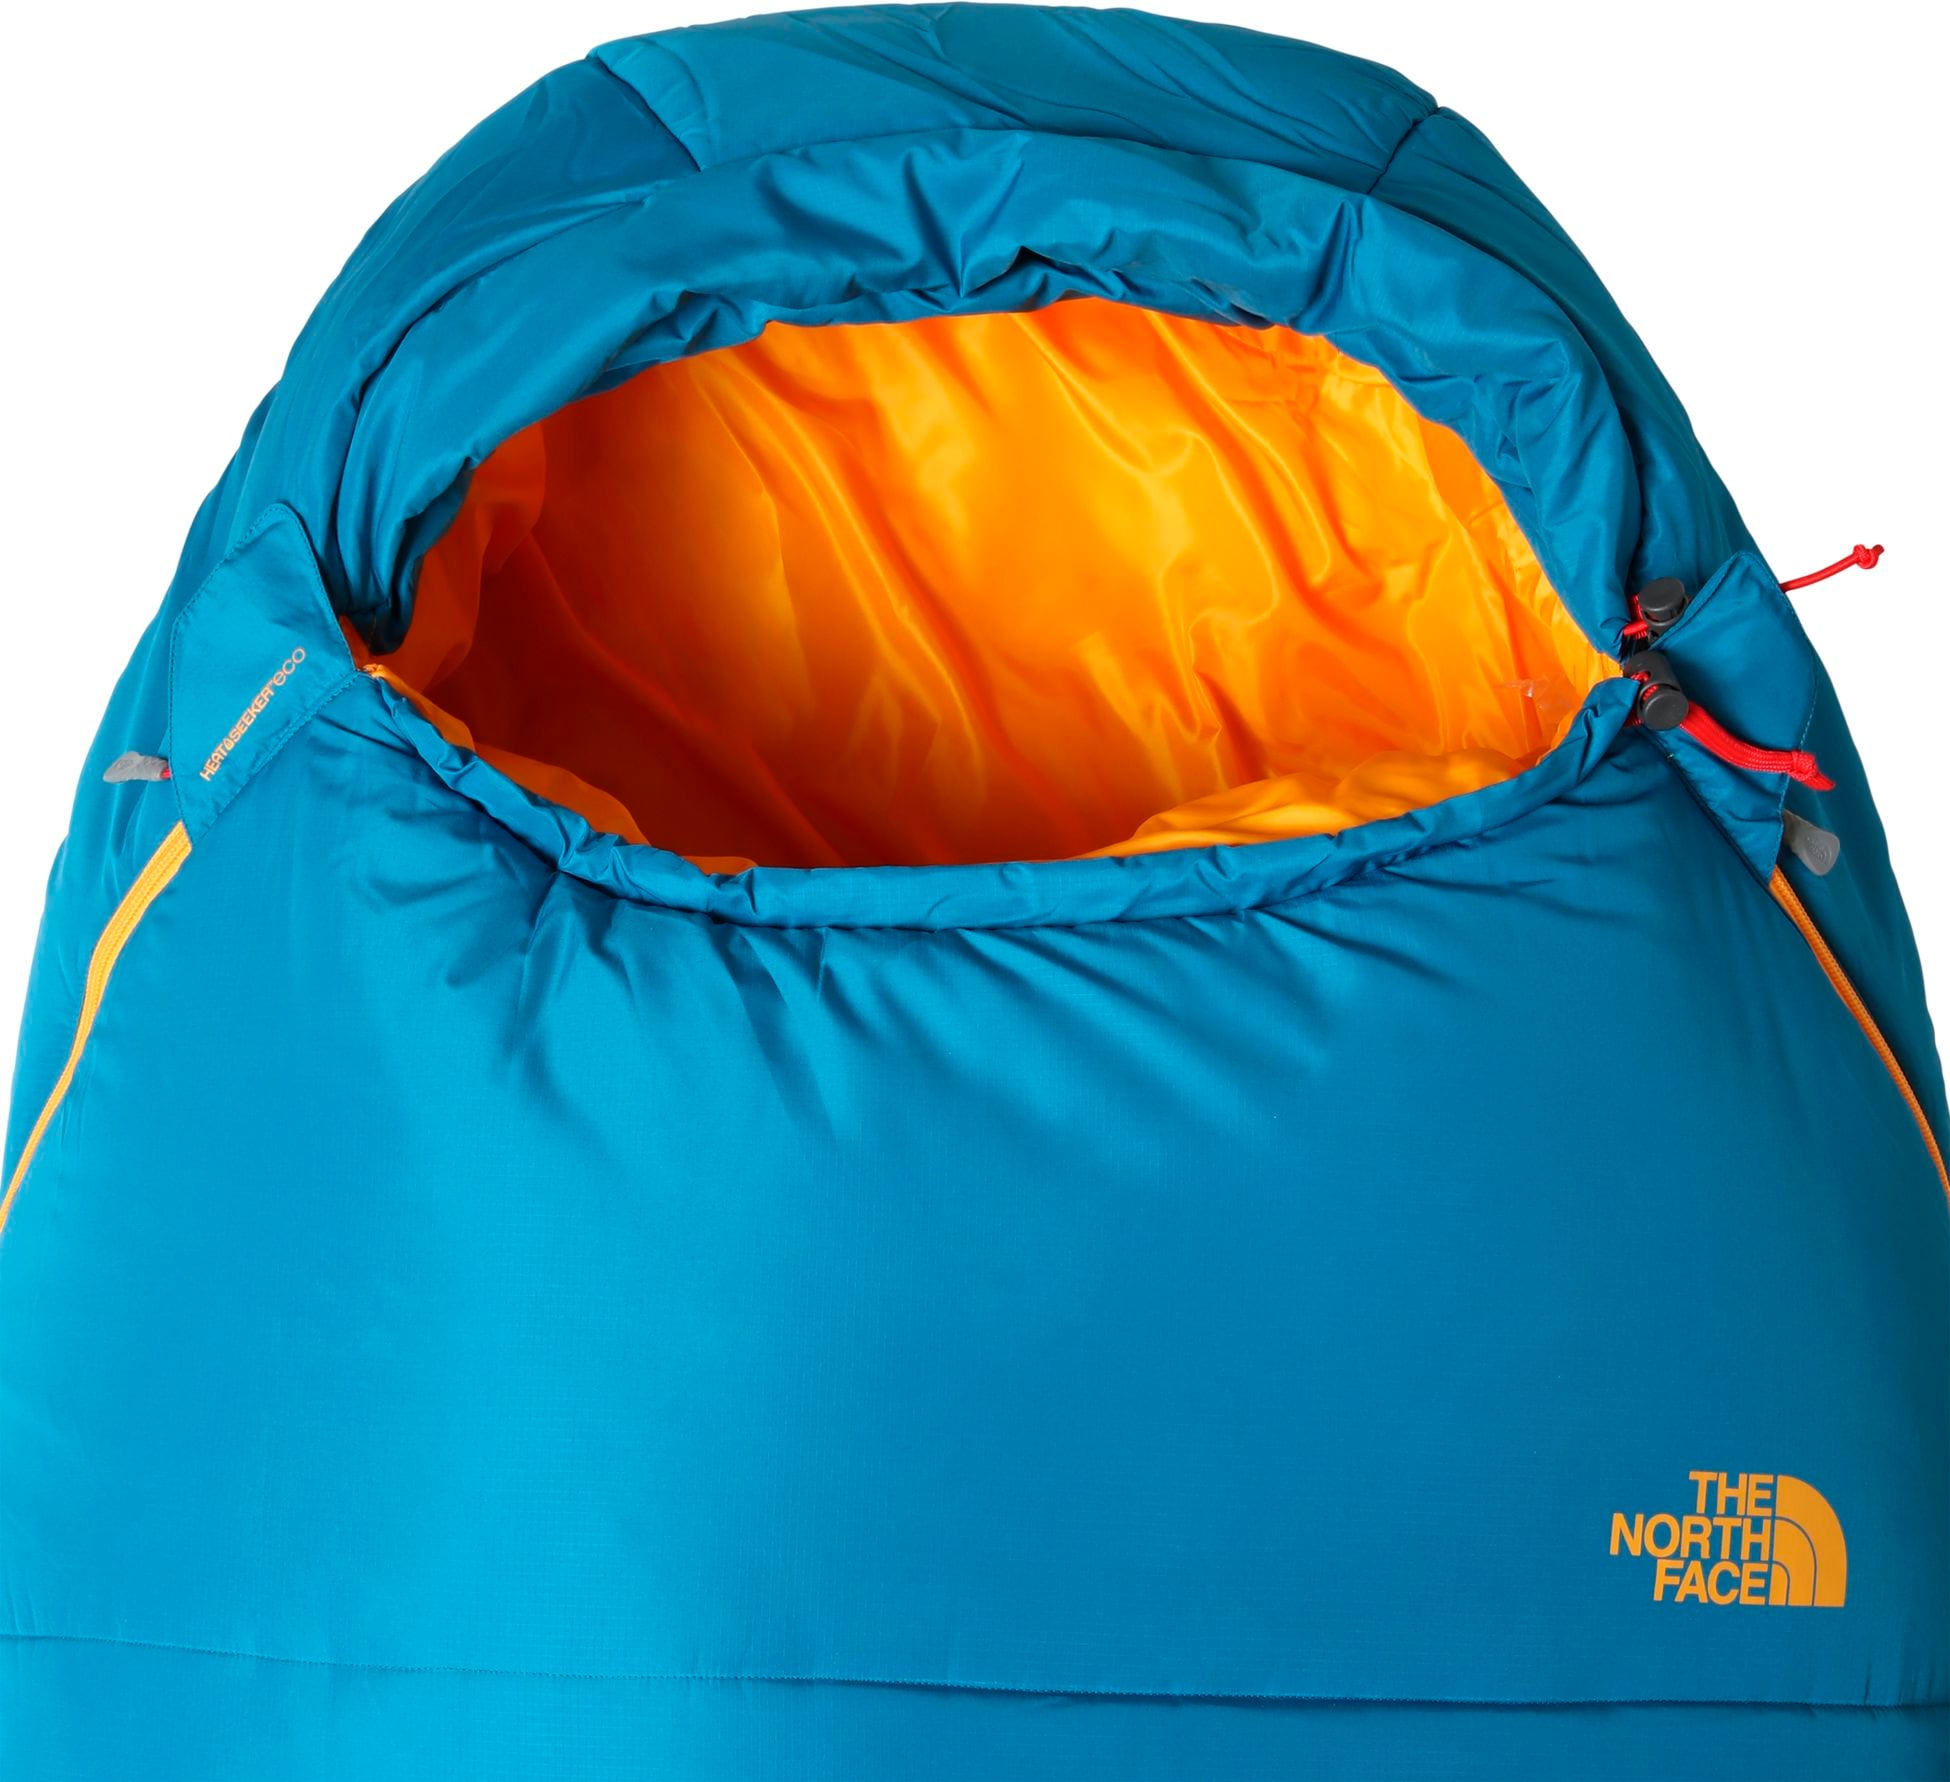 THE NORTH FACE, WASATCH PRO 20